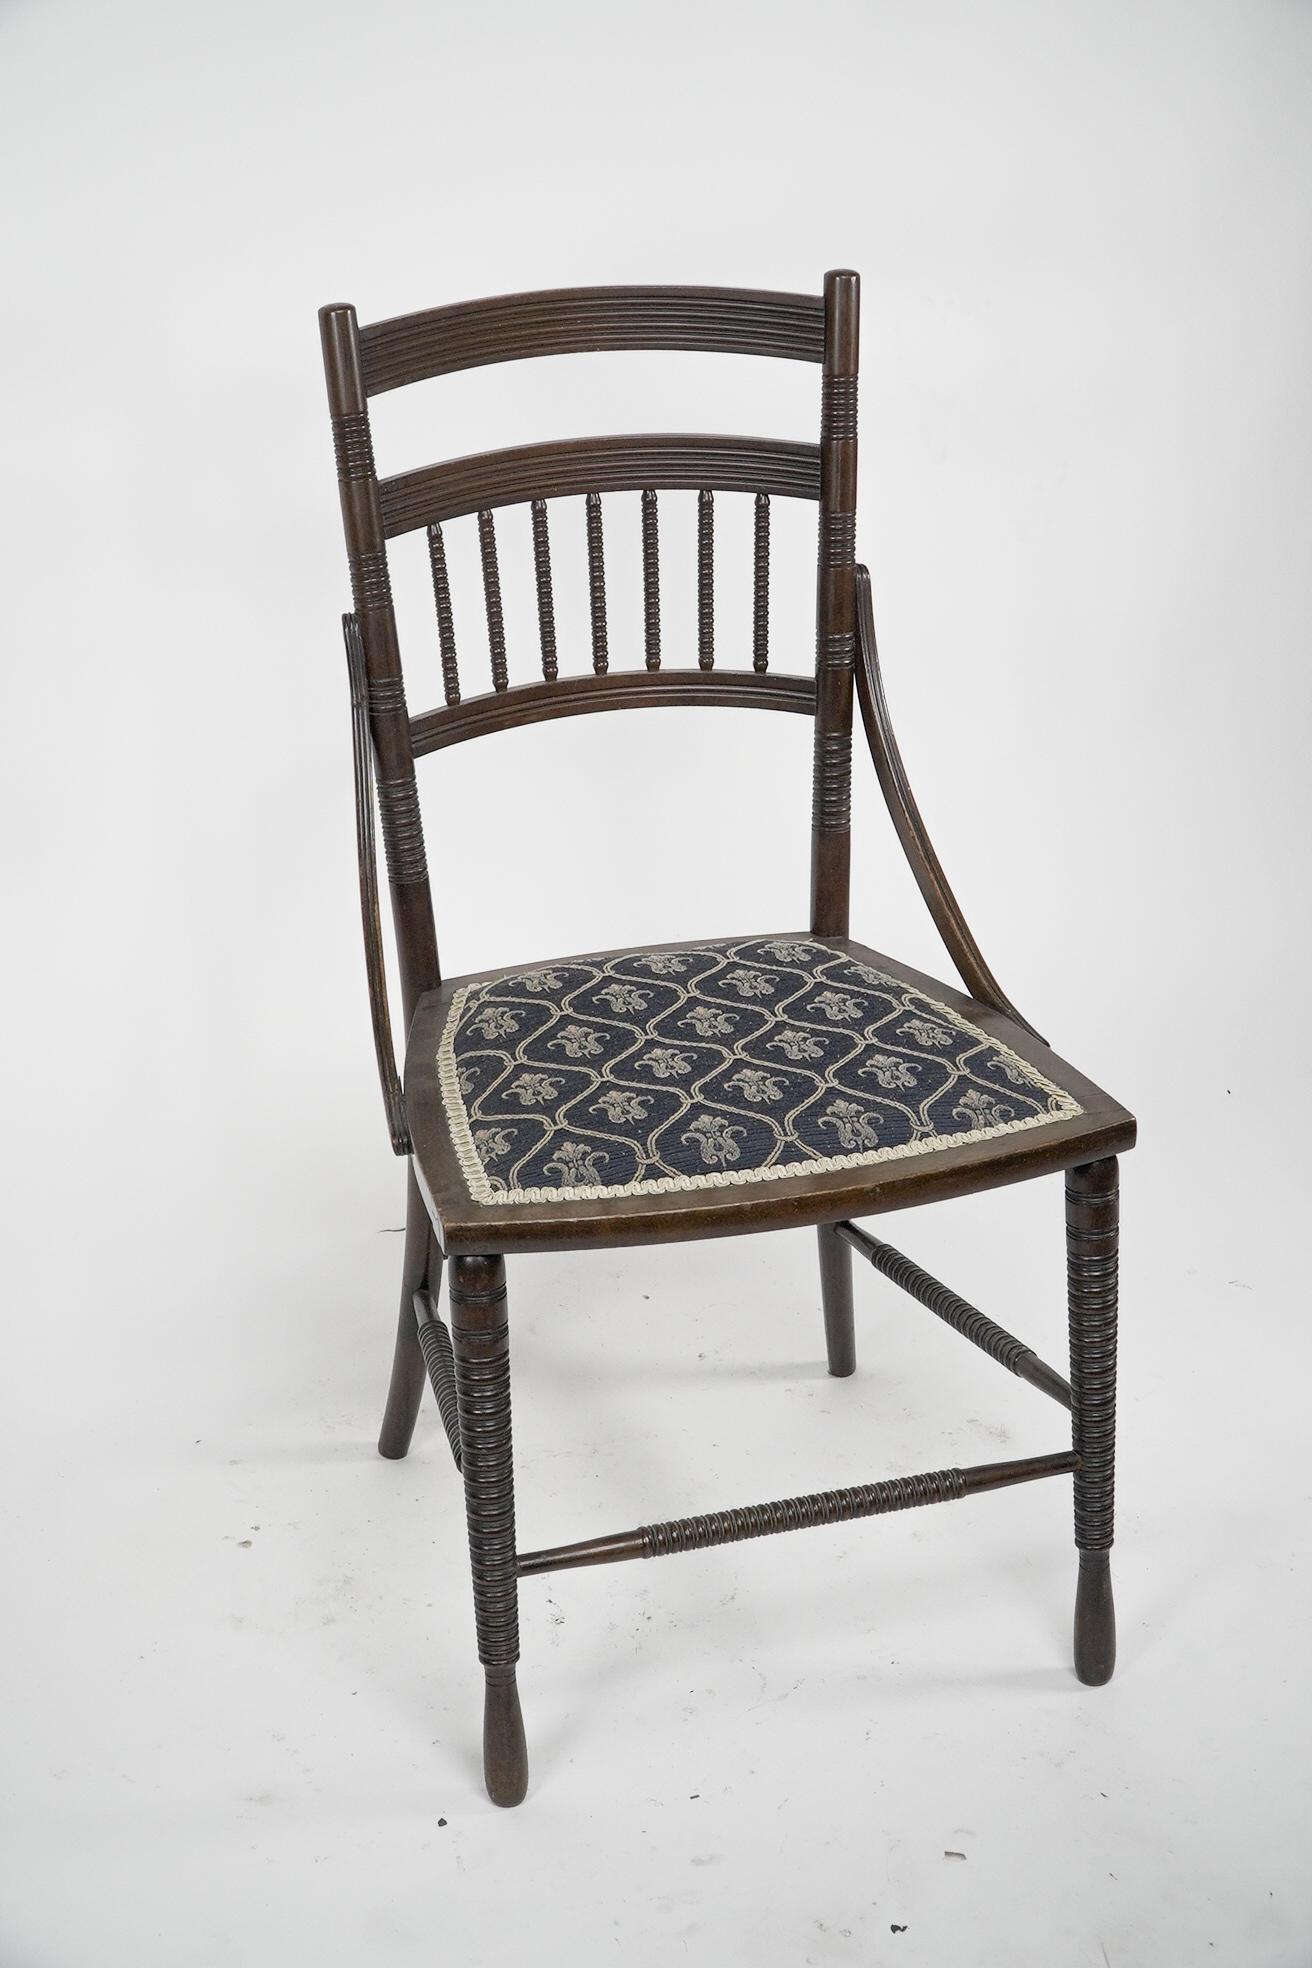 English R. W. Edis, probably made by Jackson & Graham A fine pair of Walnut side chairs For Sale